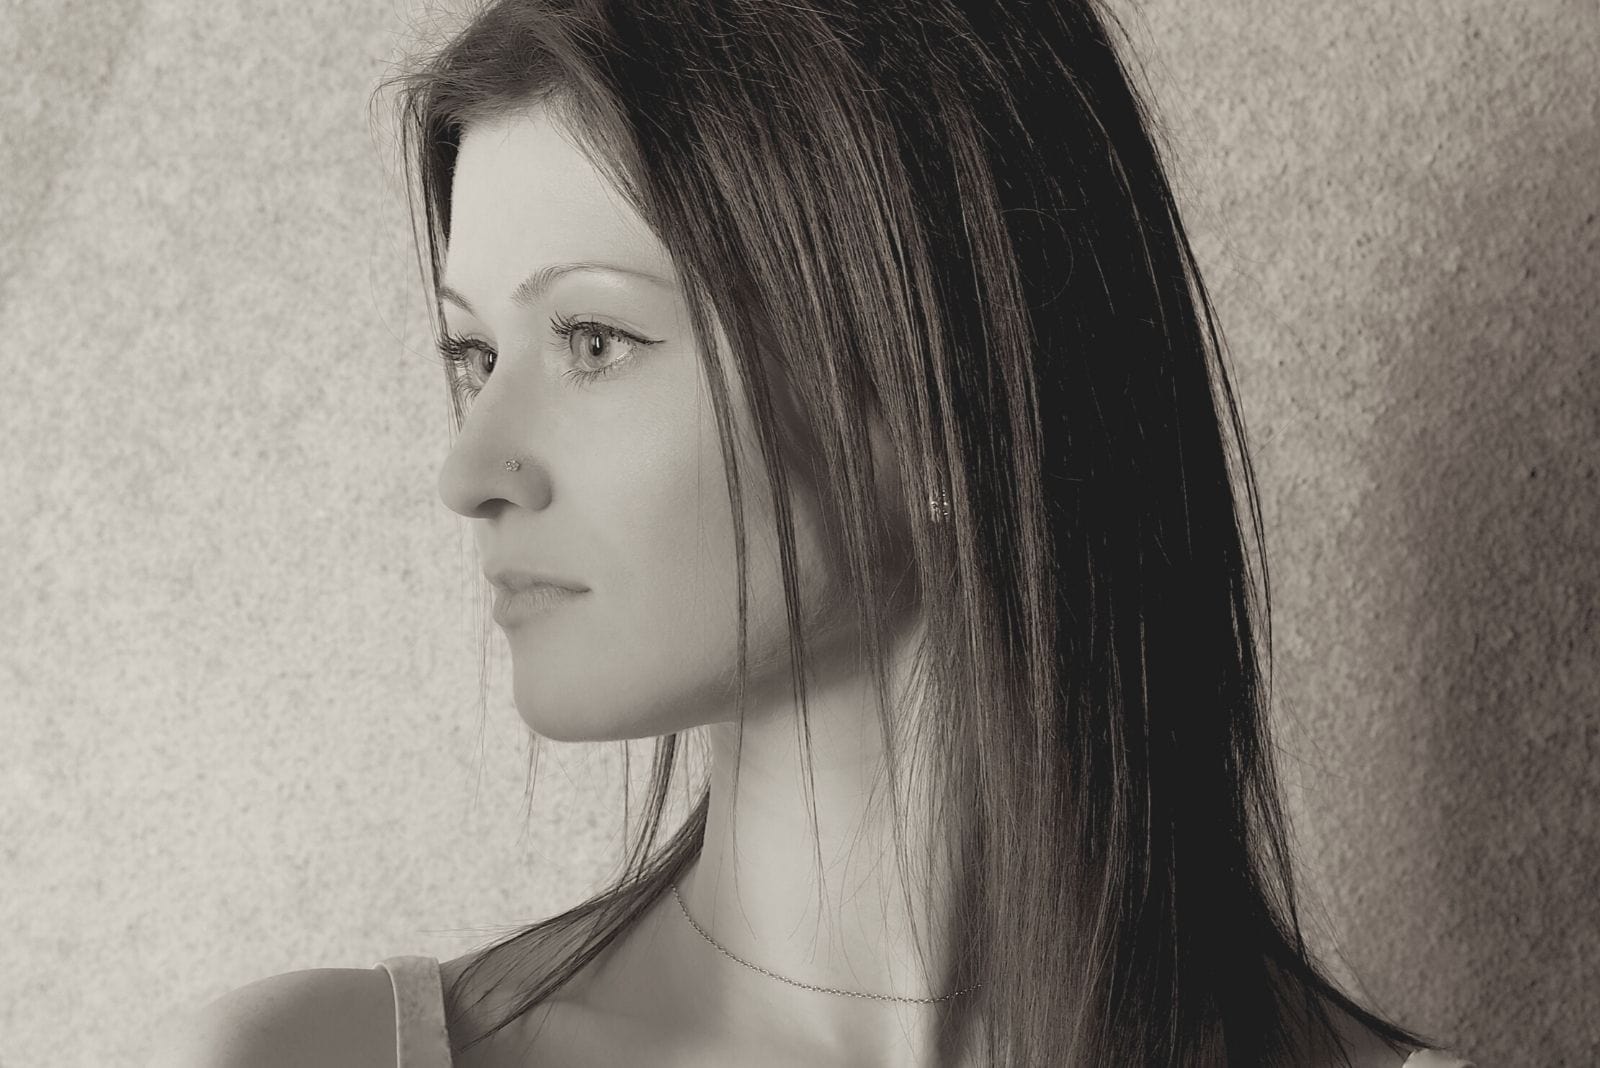 pensive young woman standing againsta a gray stoned background 